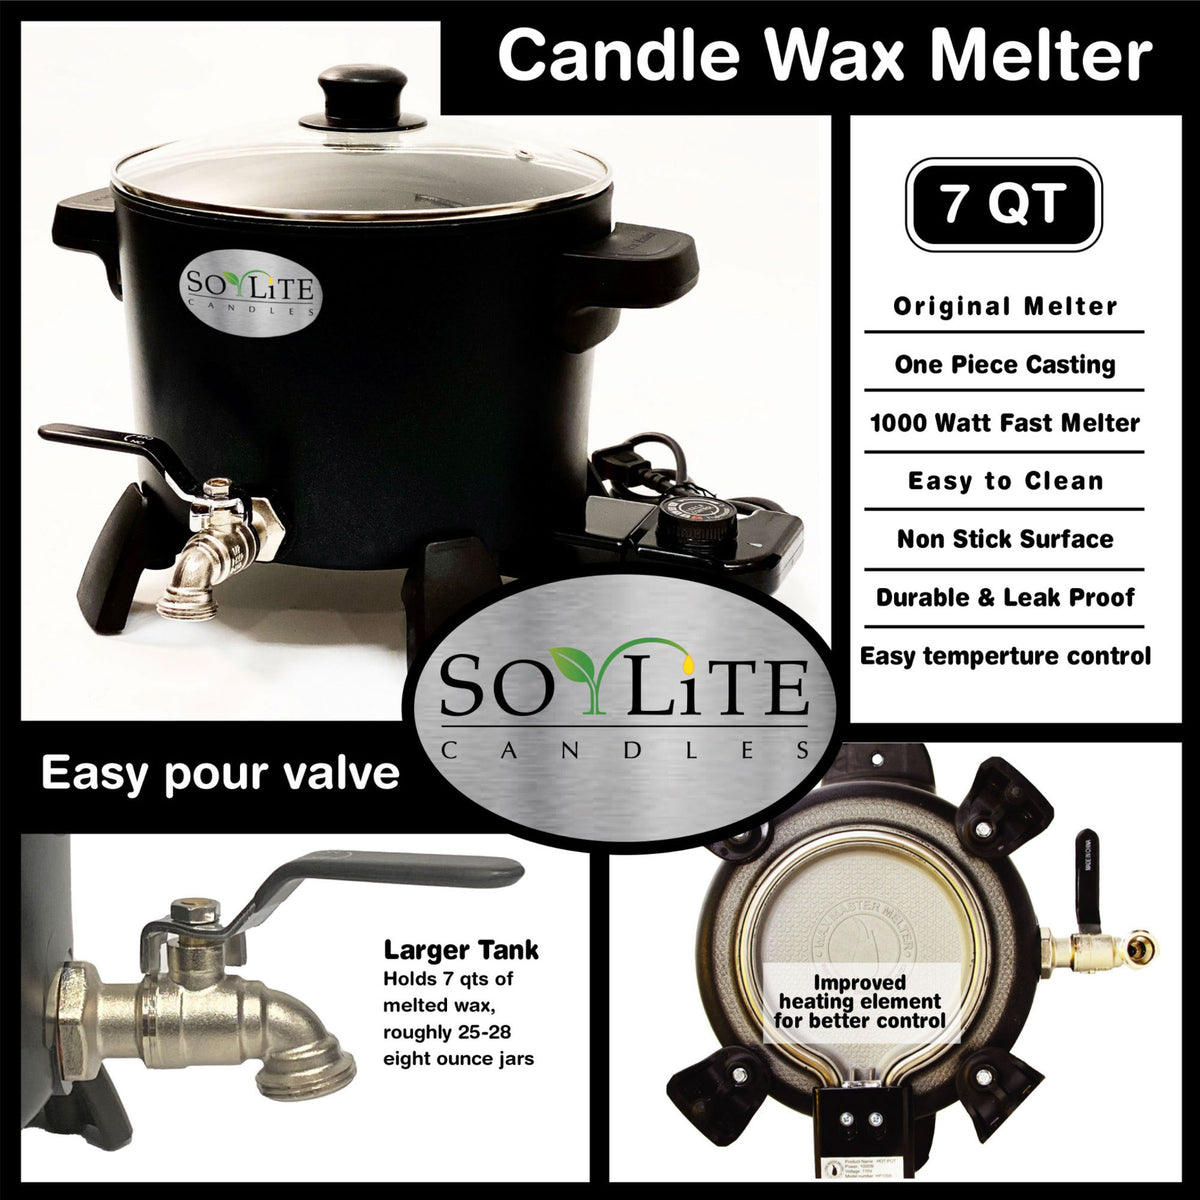 New 220 Volt Power. Wax Melter For Candle Making, This Wax Warmer Will –  Soy Lite Candle Supplies